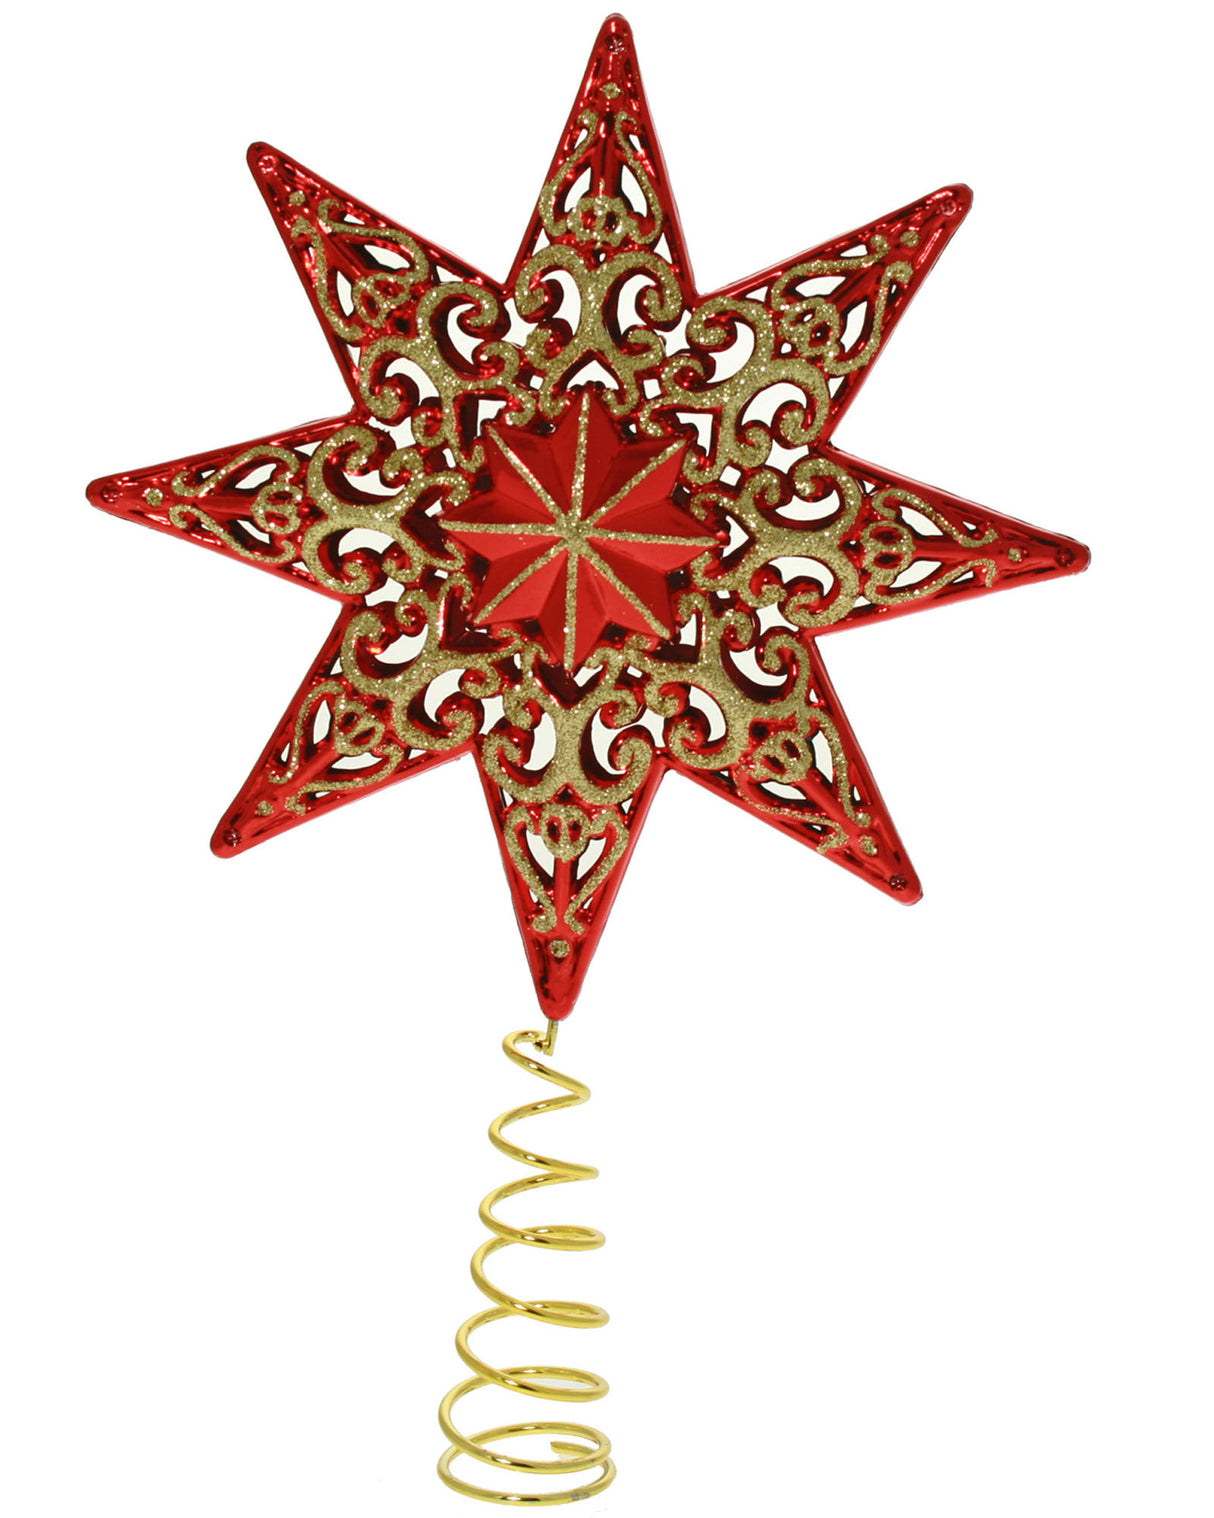 Shatterproof Deluxe Christmas Star Tree Topper with Glitter, 21 cm, Red